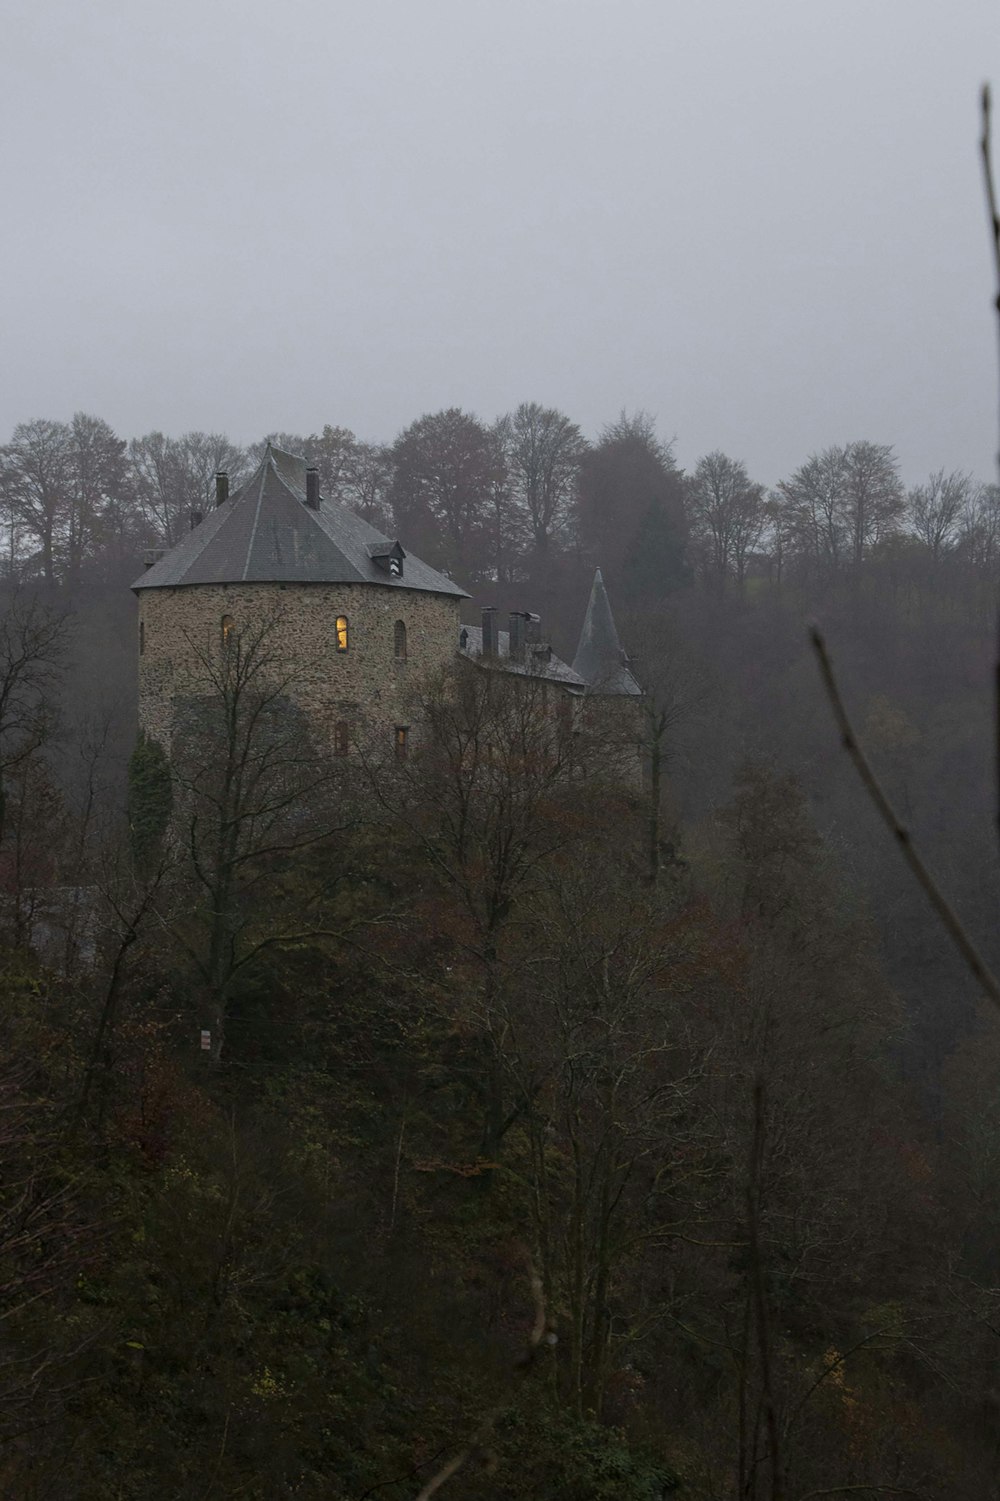 an old building on a hill surrounded by trees